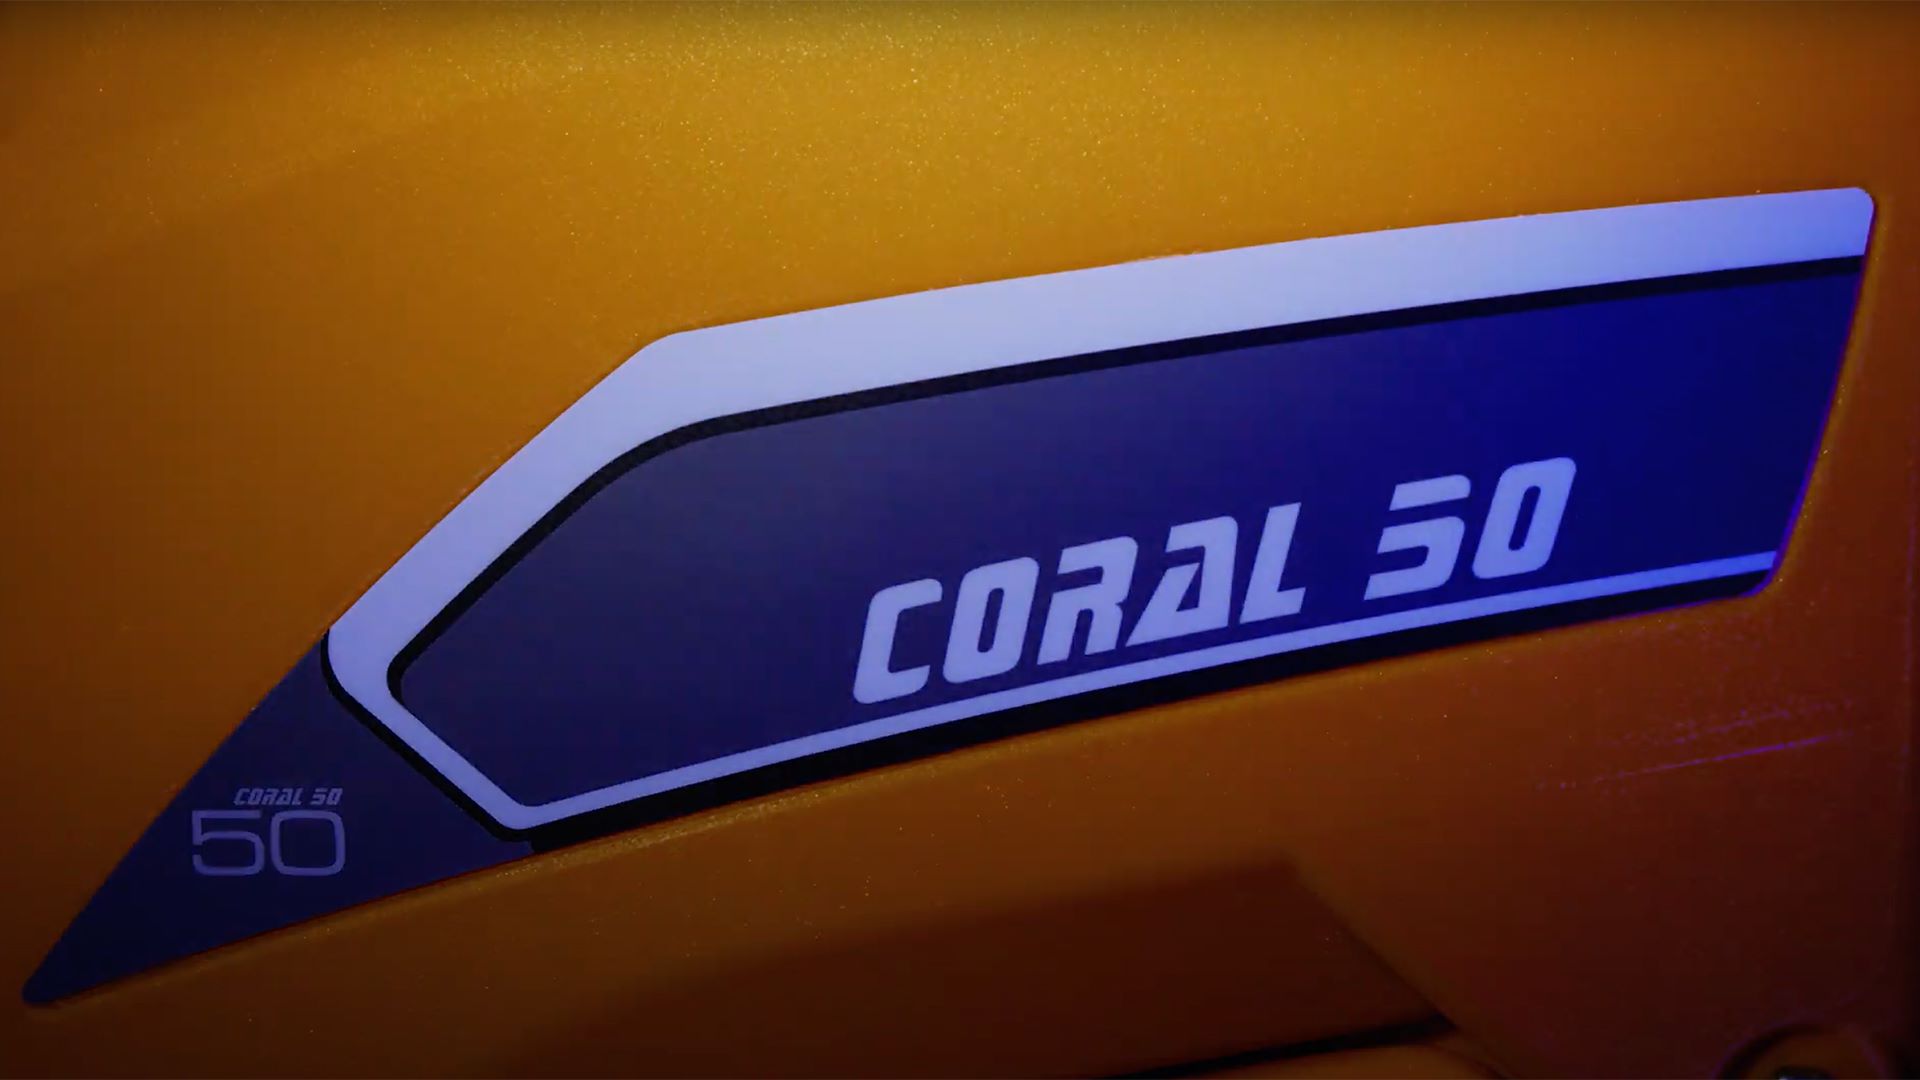 The new coral 50!